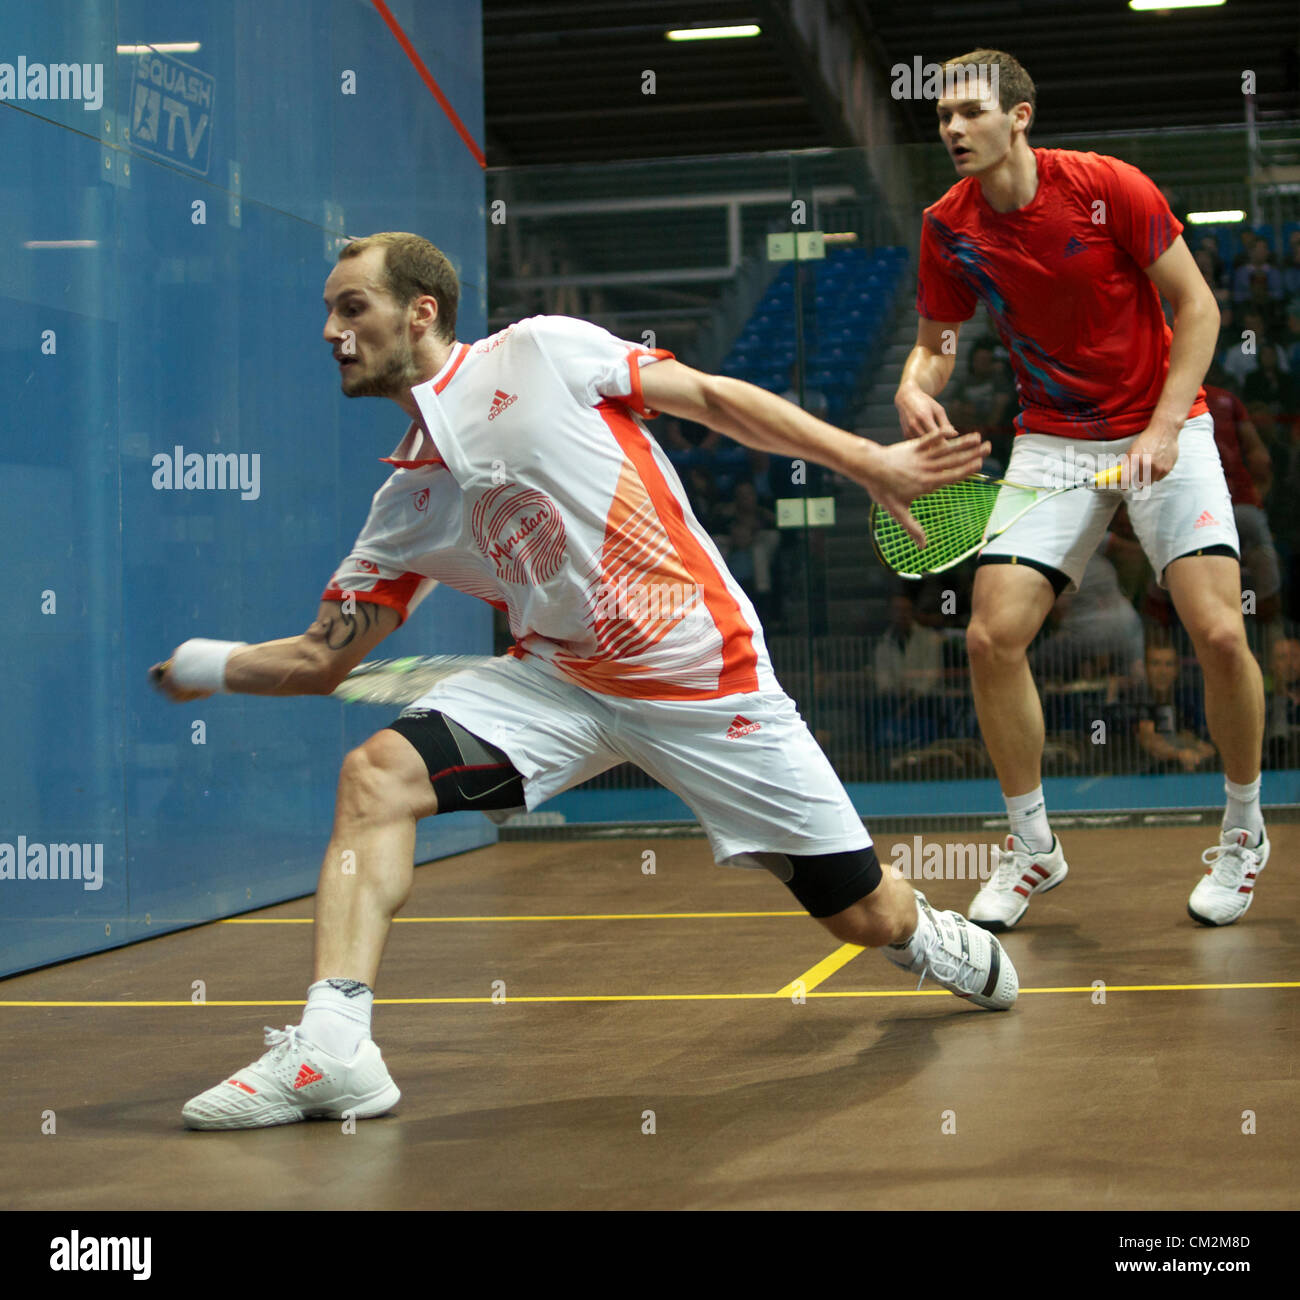 Gregory Gaultier (France).moves to make a forehand  return during his match with Adrian Waller (England). Gaultier won the first round match 11-6.11-7.11-4 in the British Grand Prix at Sportcity, Manchester, UK 21-09-2012 Stock Photo